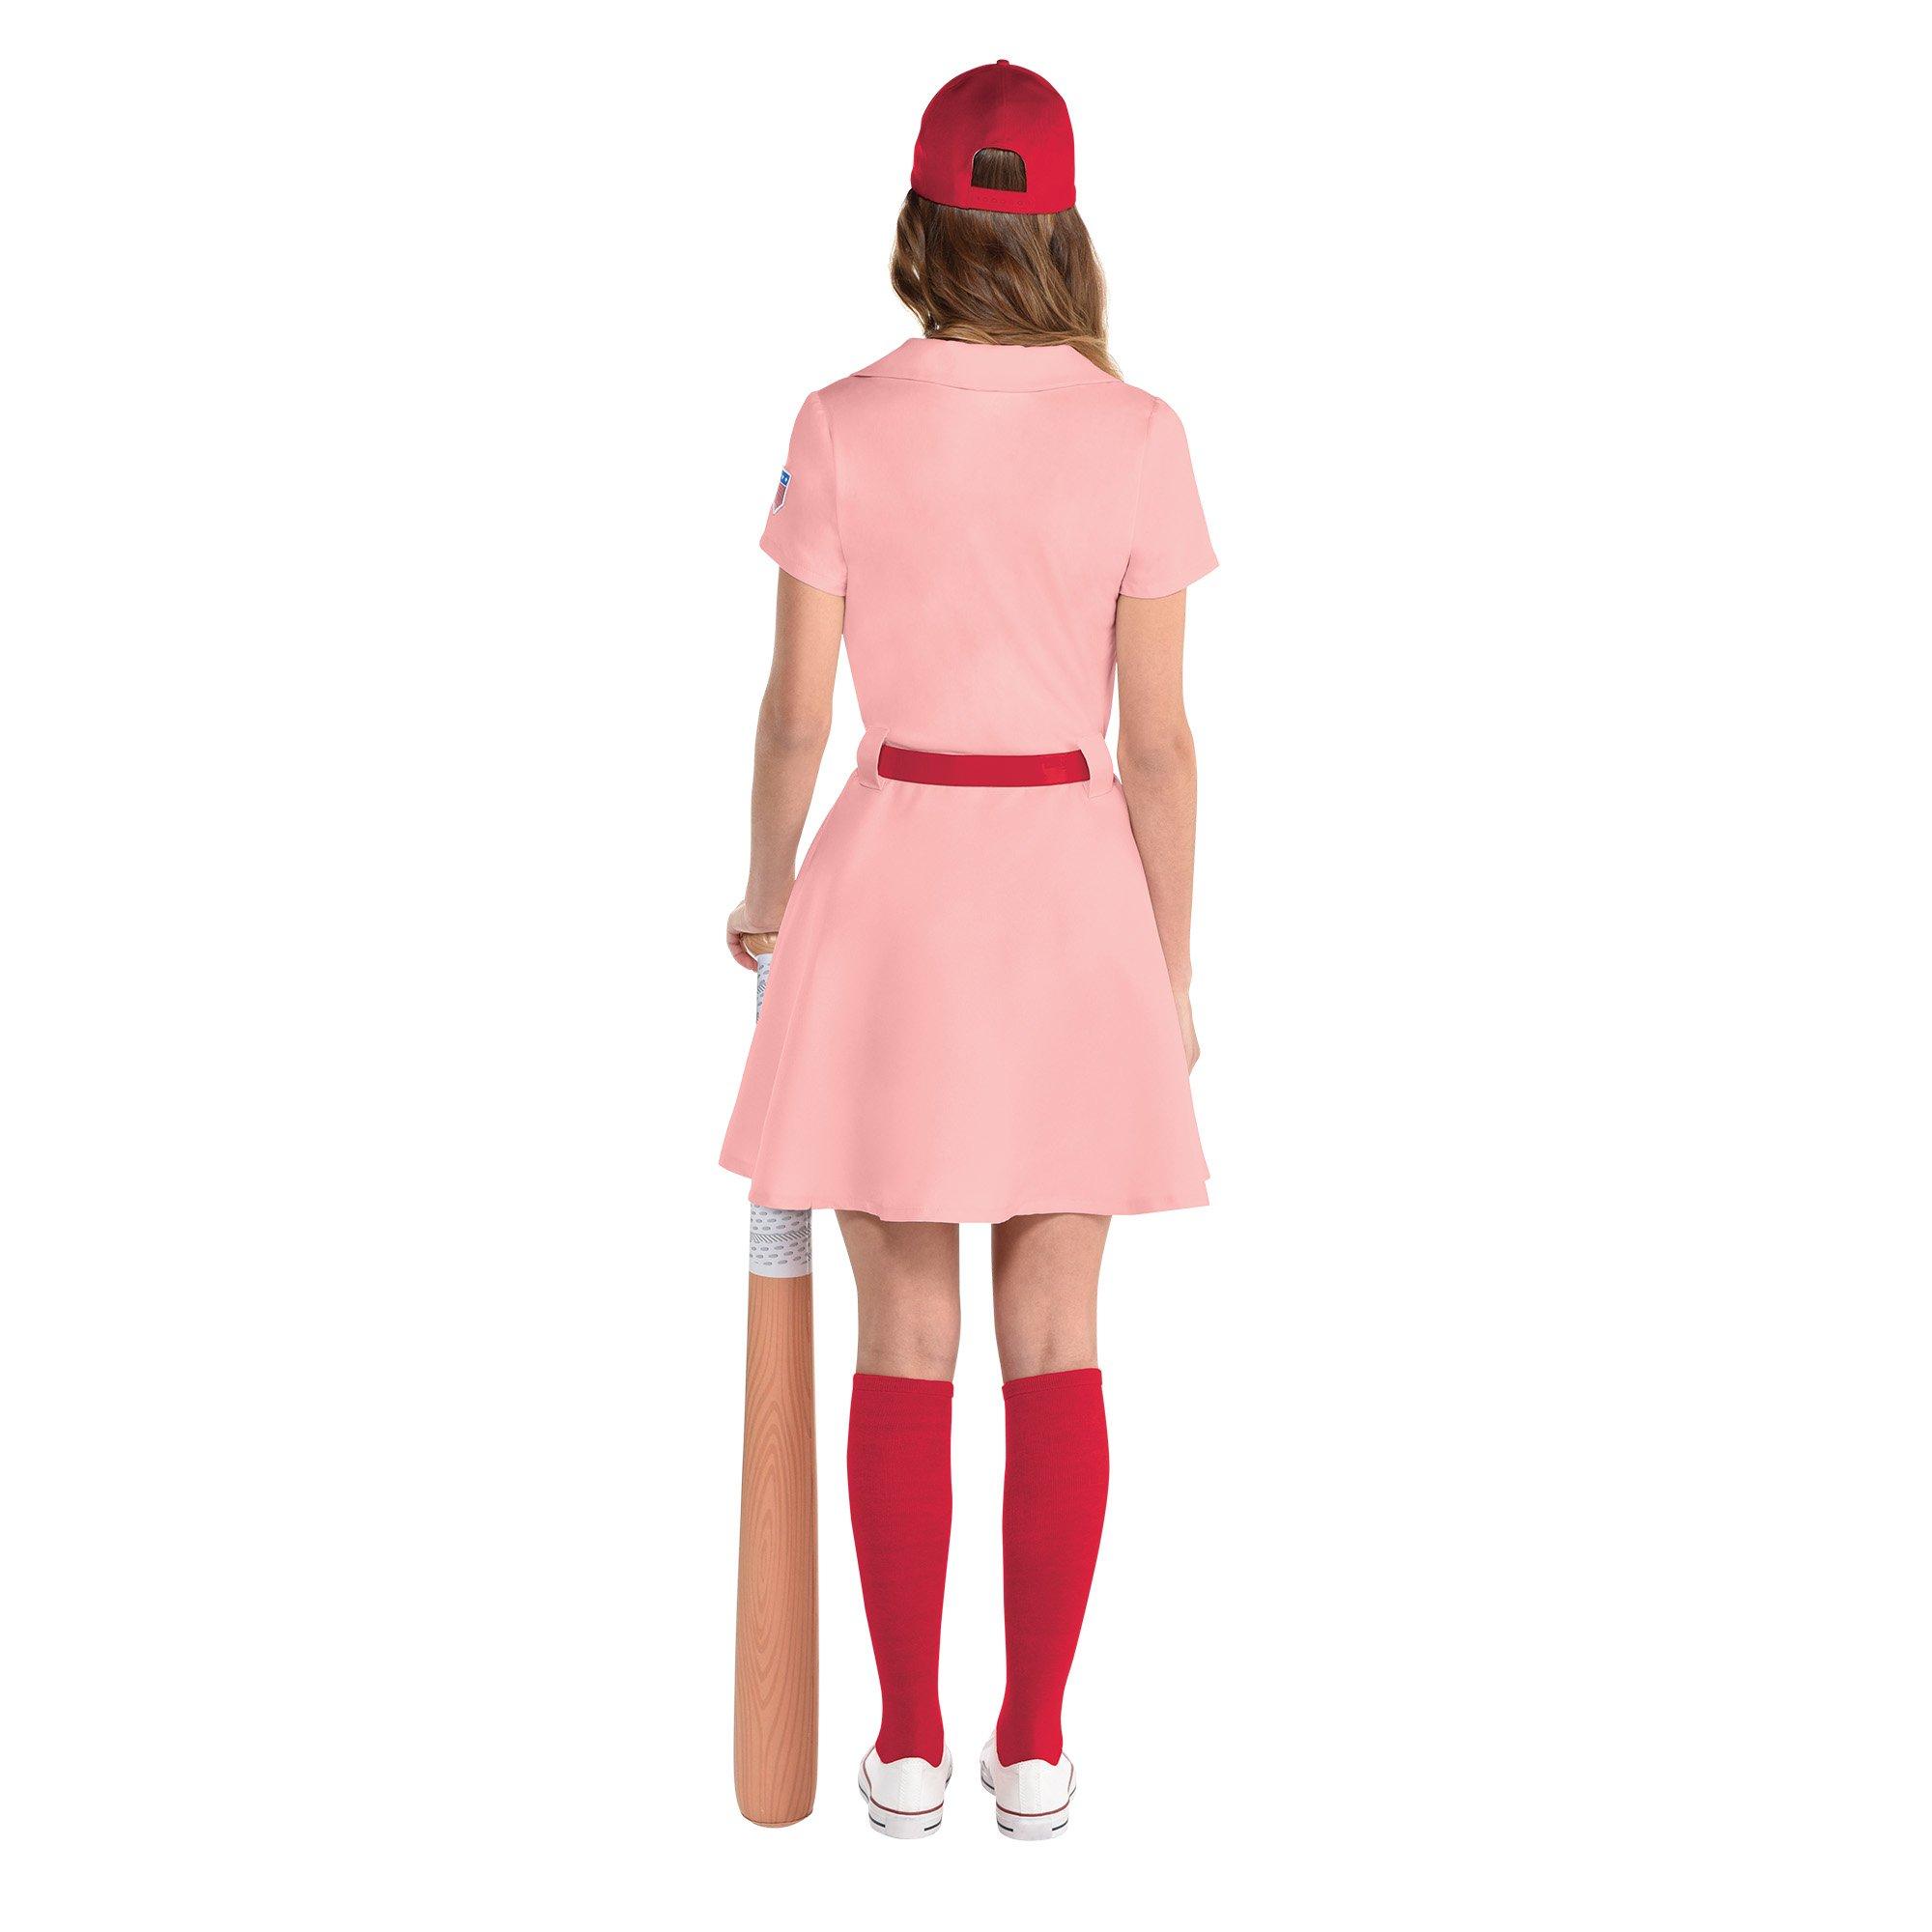 Adult Rockford Peaches Costume - A League of Their Own